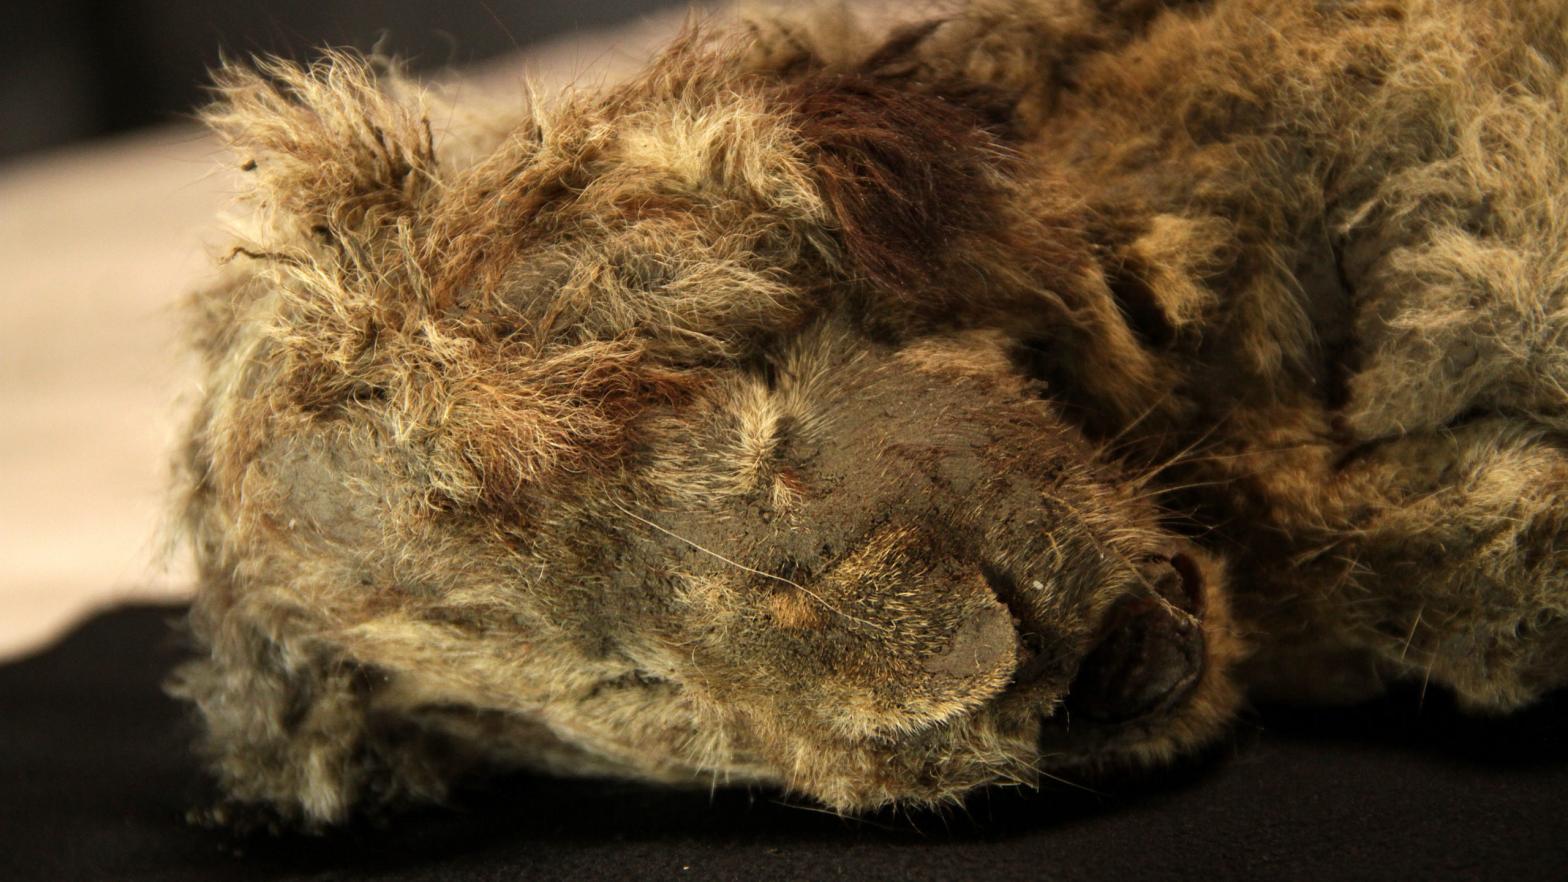 Well-preserved remains of 28,000-year-old cave lion cub, found two years ago in Siberia.  (Image: Love Dalén)